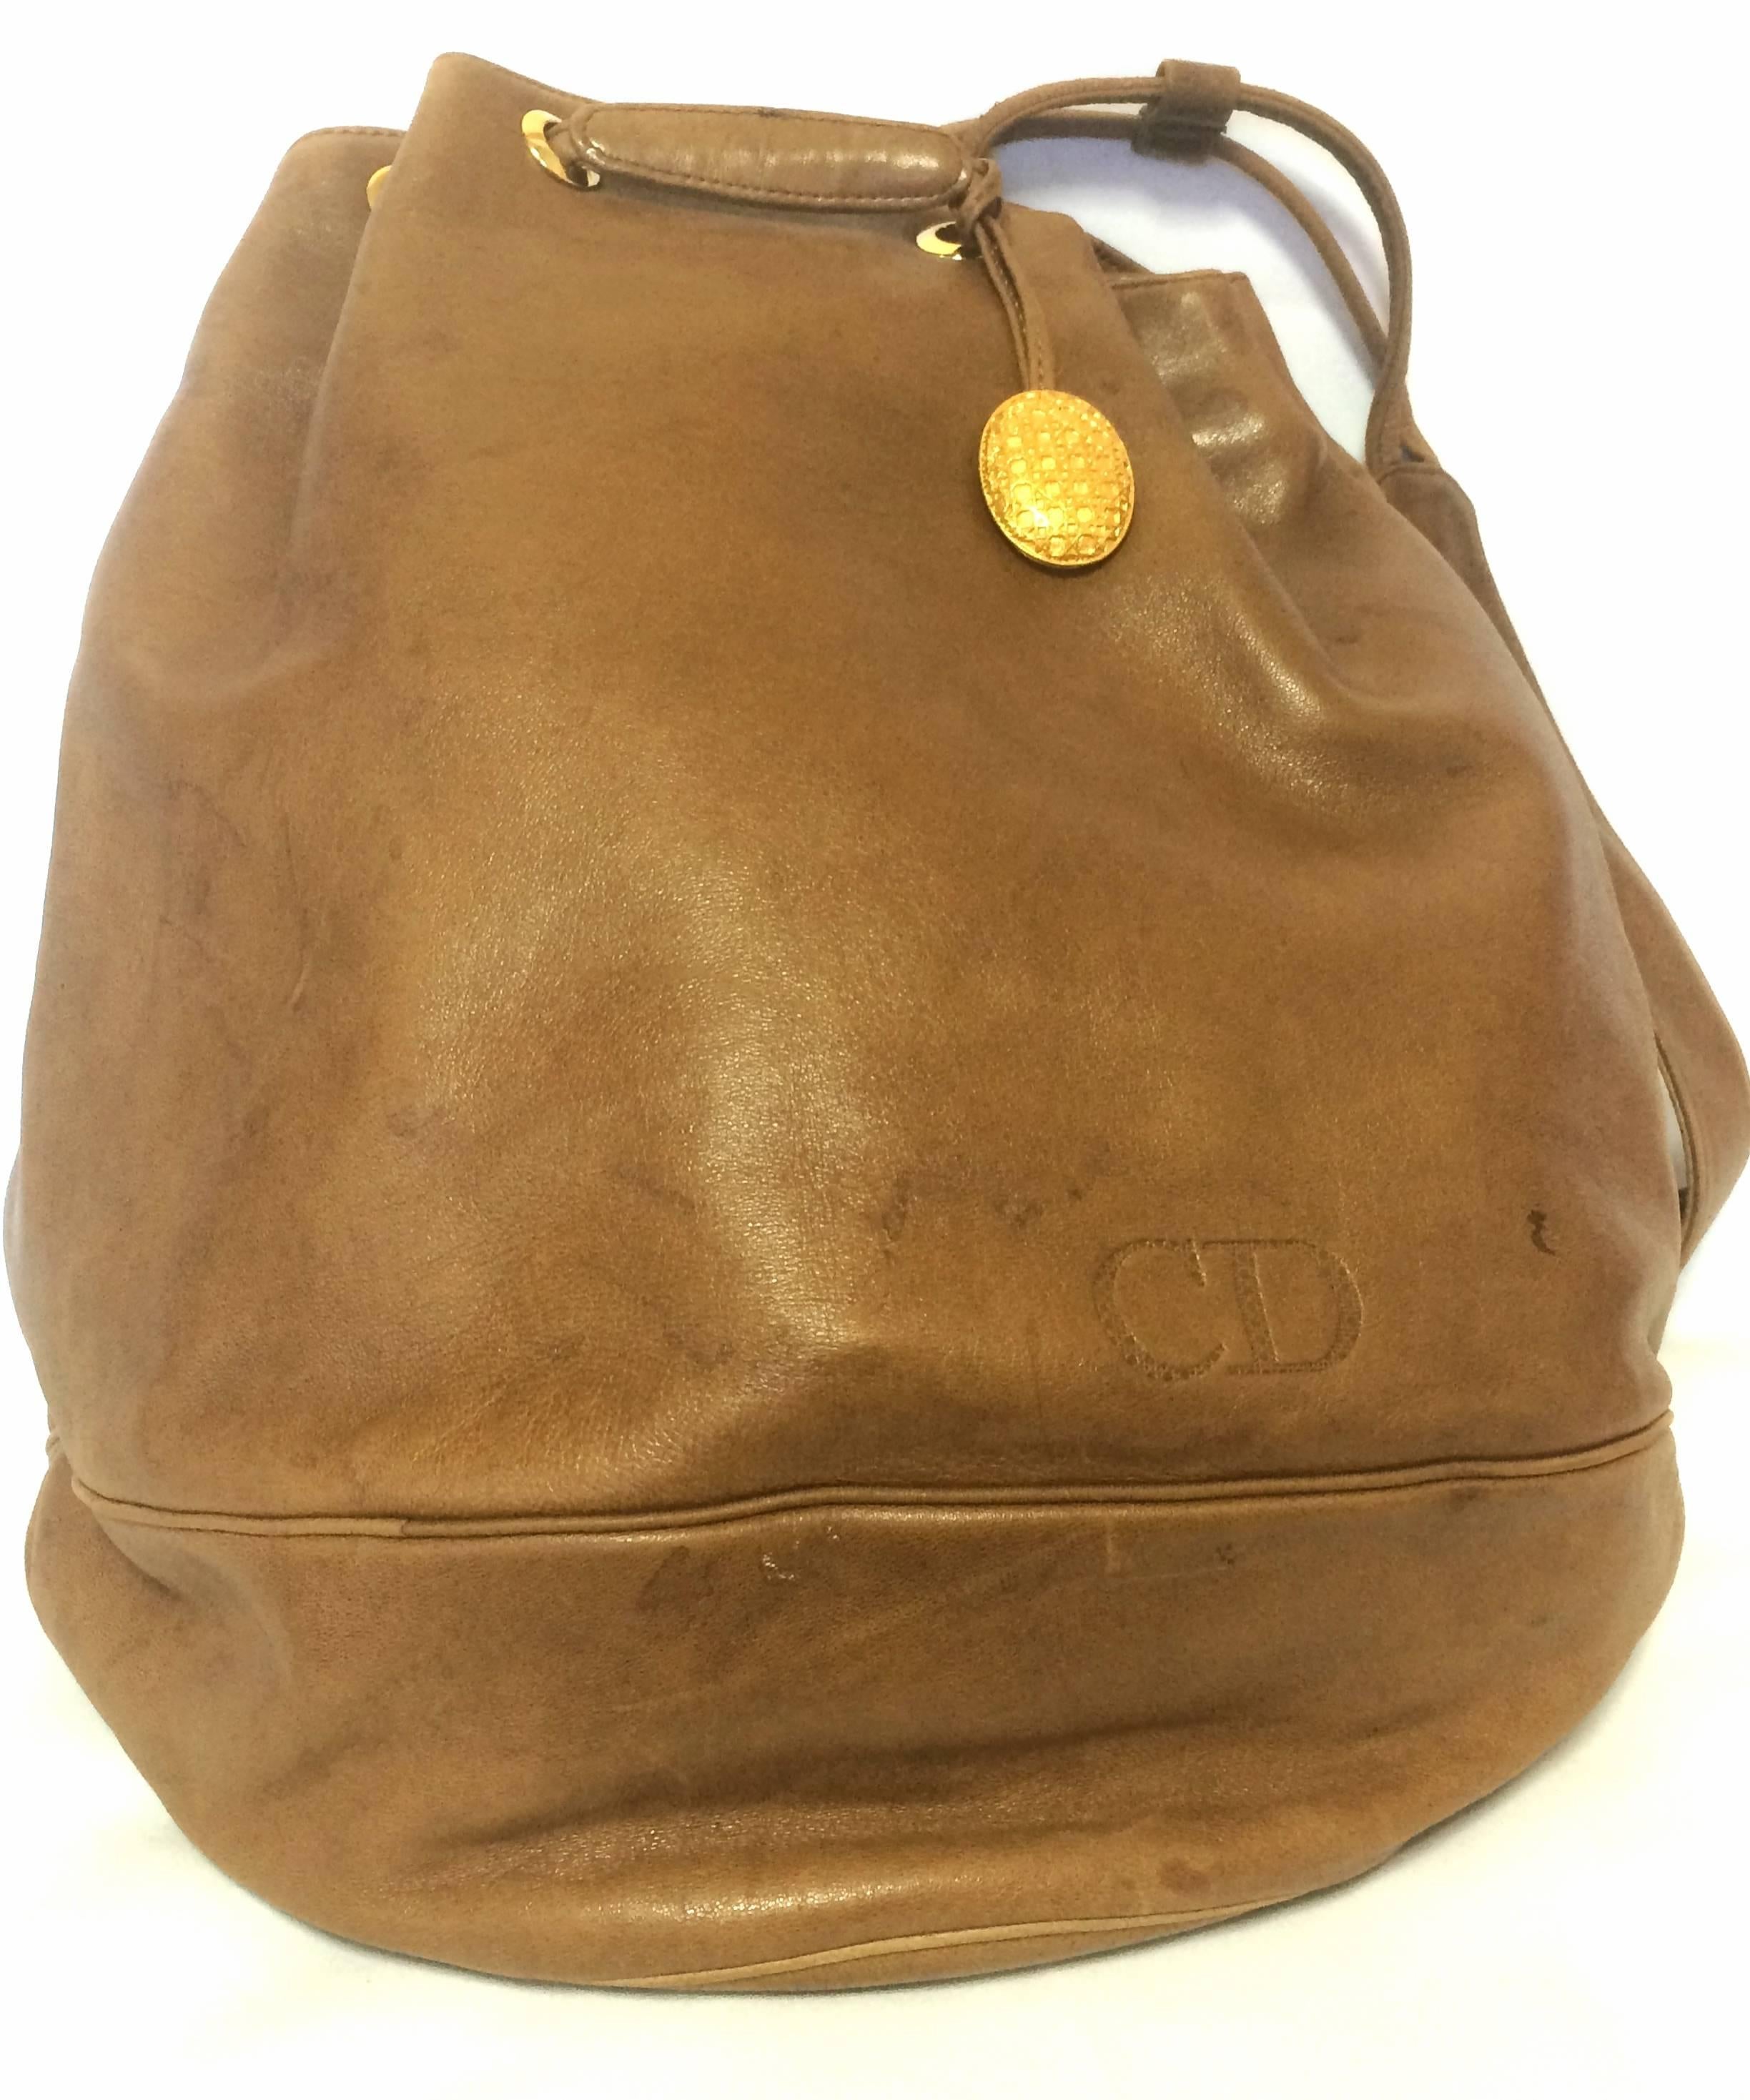 1990s. Vintage Christian Dior brown genuine nappa leather backpack design, large hobo bucket shoulder bag with golden logo. Unisex

Introducing another unique and rare vintage piece from Christian Dior back in the early 90s.

This is like a